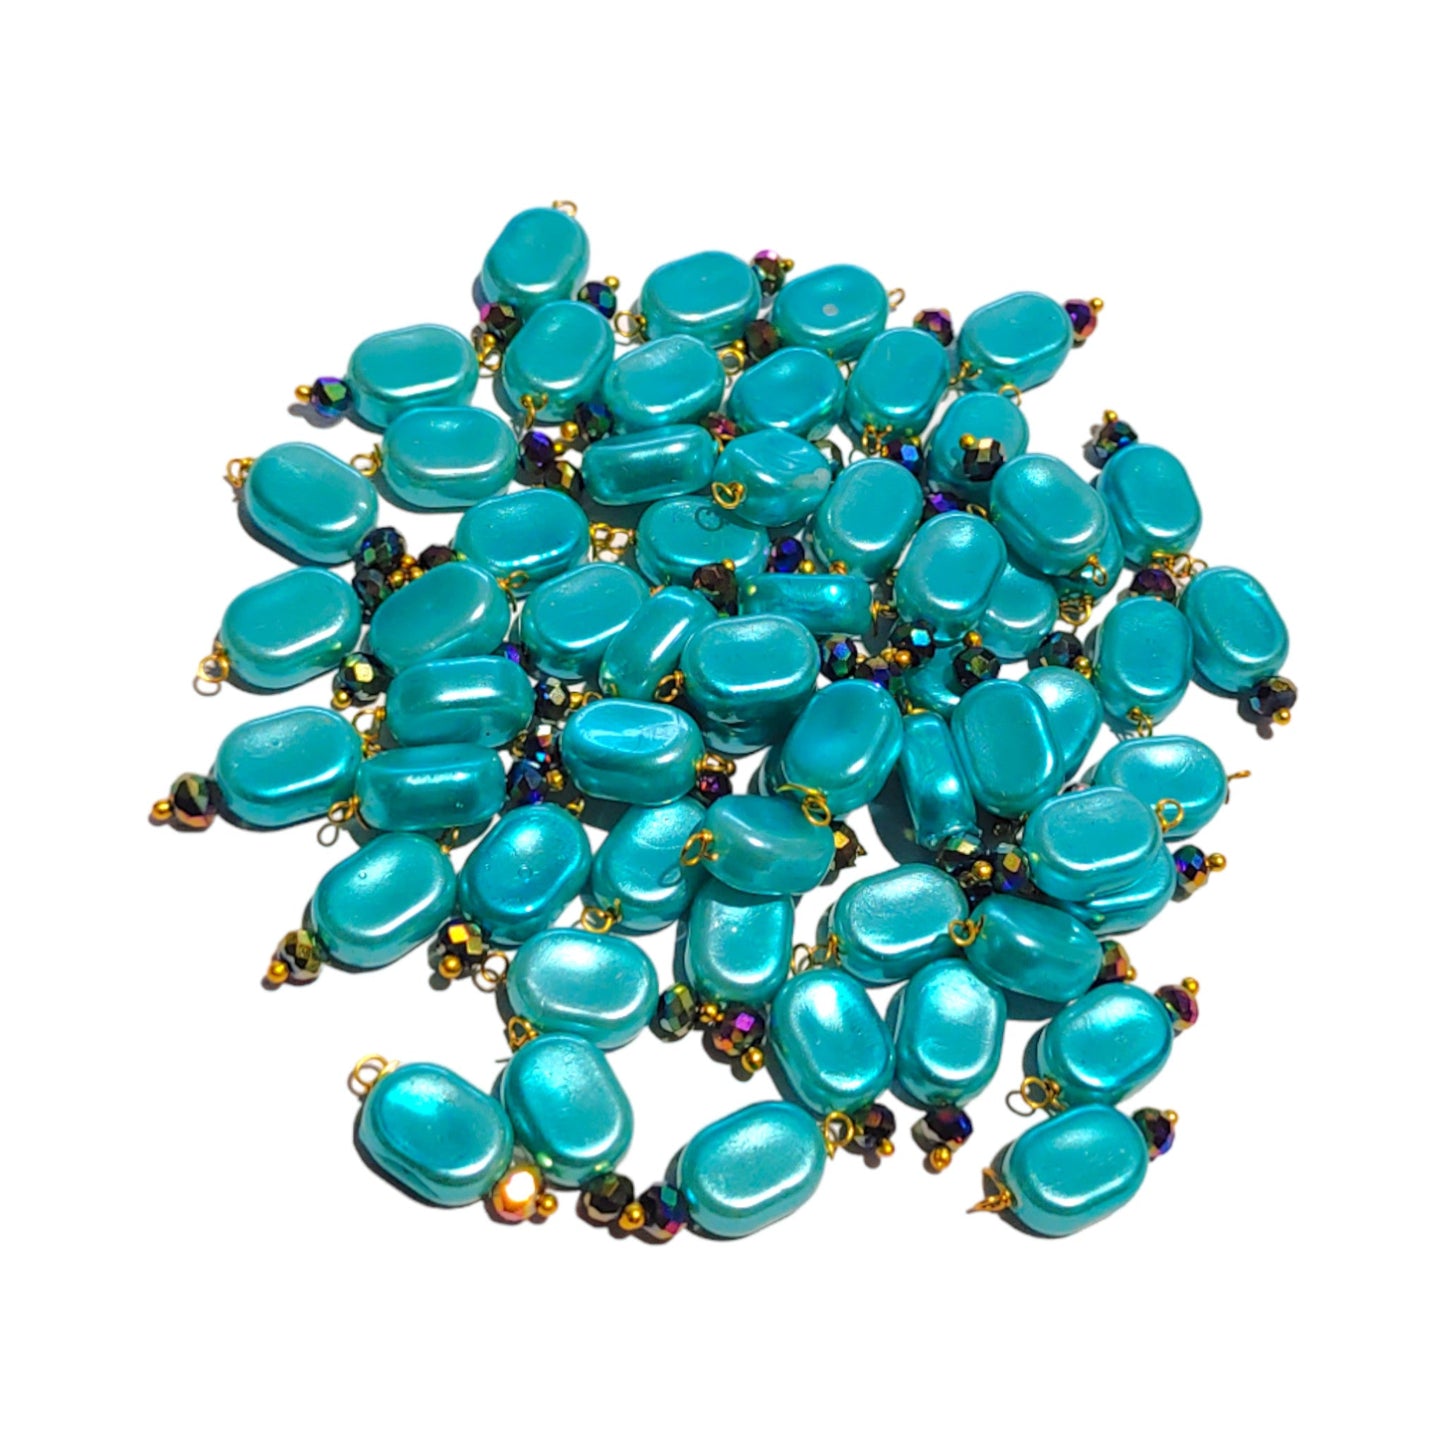 Indian Petals 100Pcs Colored Plastic Bead with Crystal Ball Drop for Craft Décor or Jewelry Making, 8x12mm, Turquoise